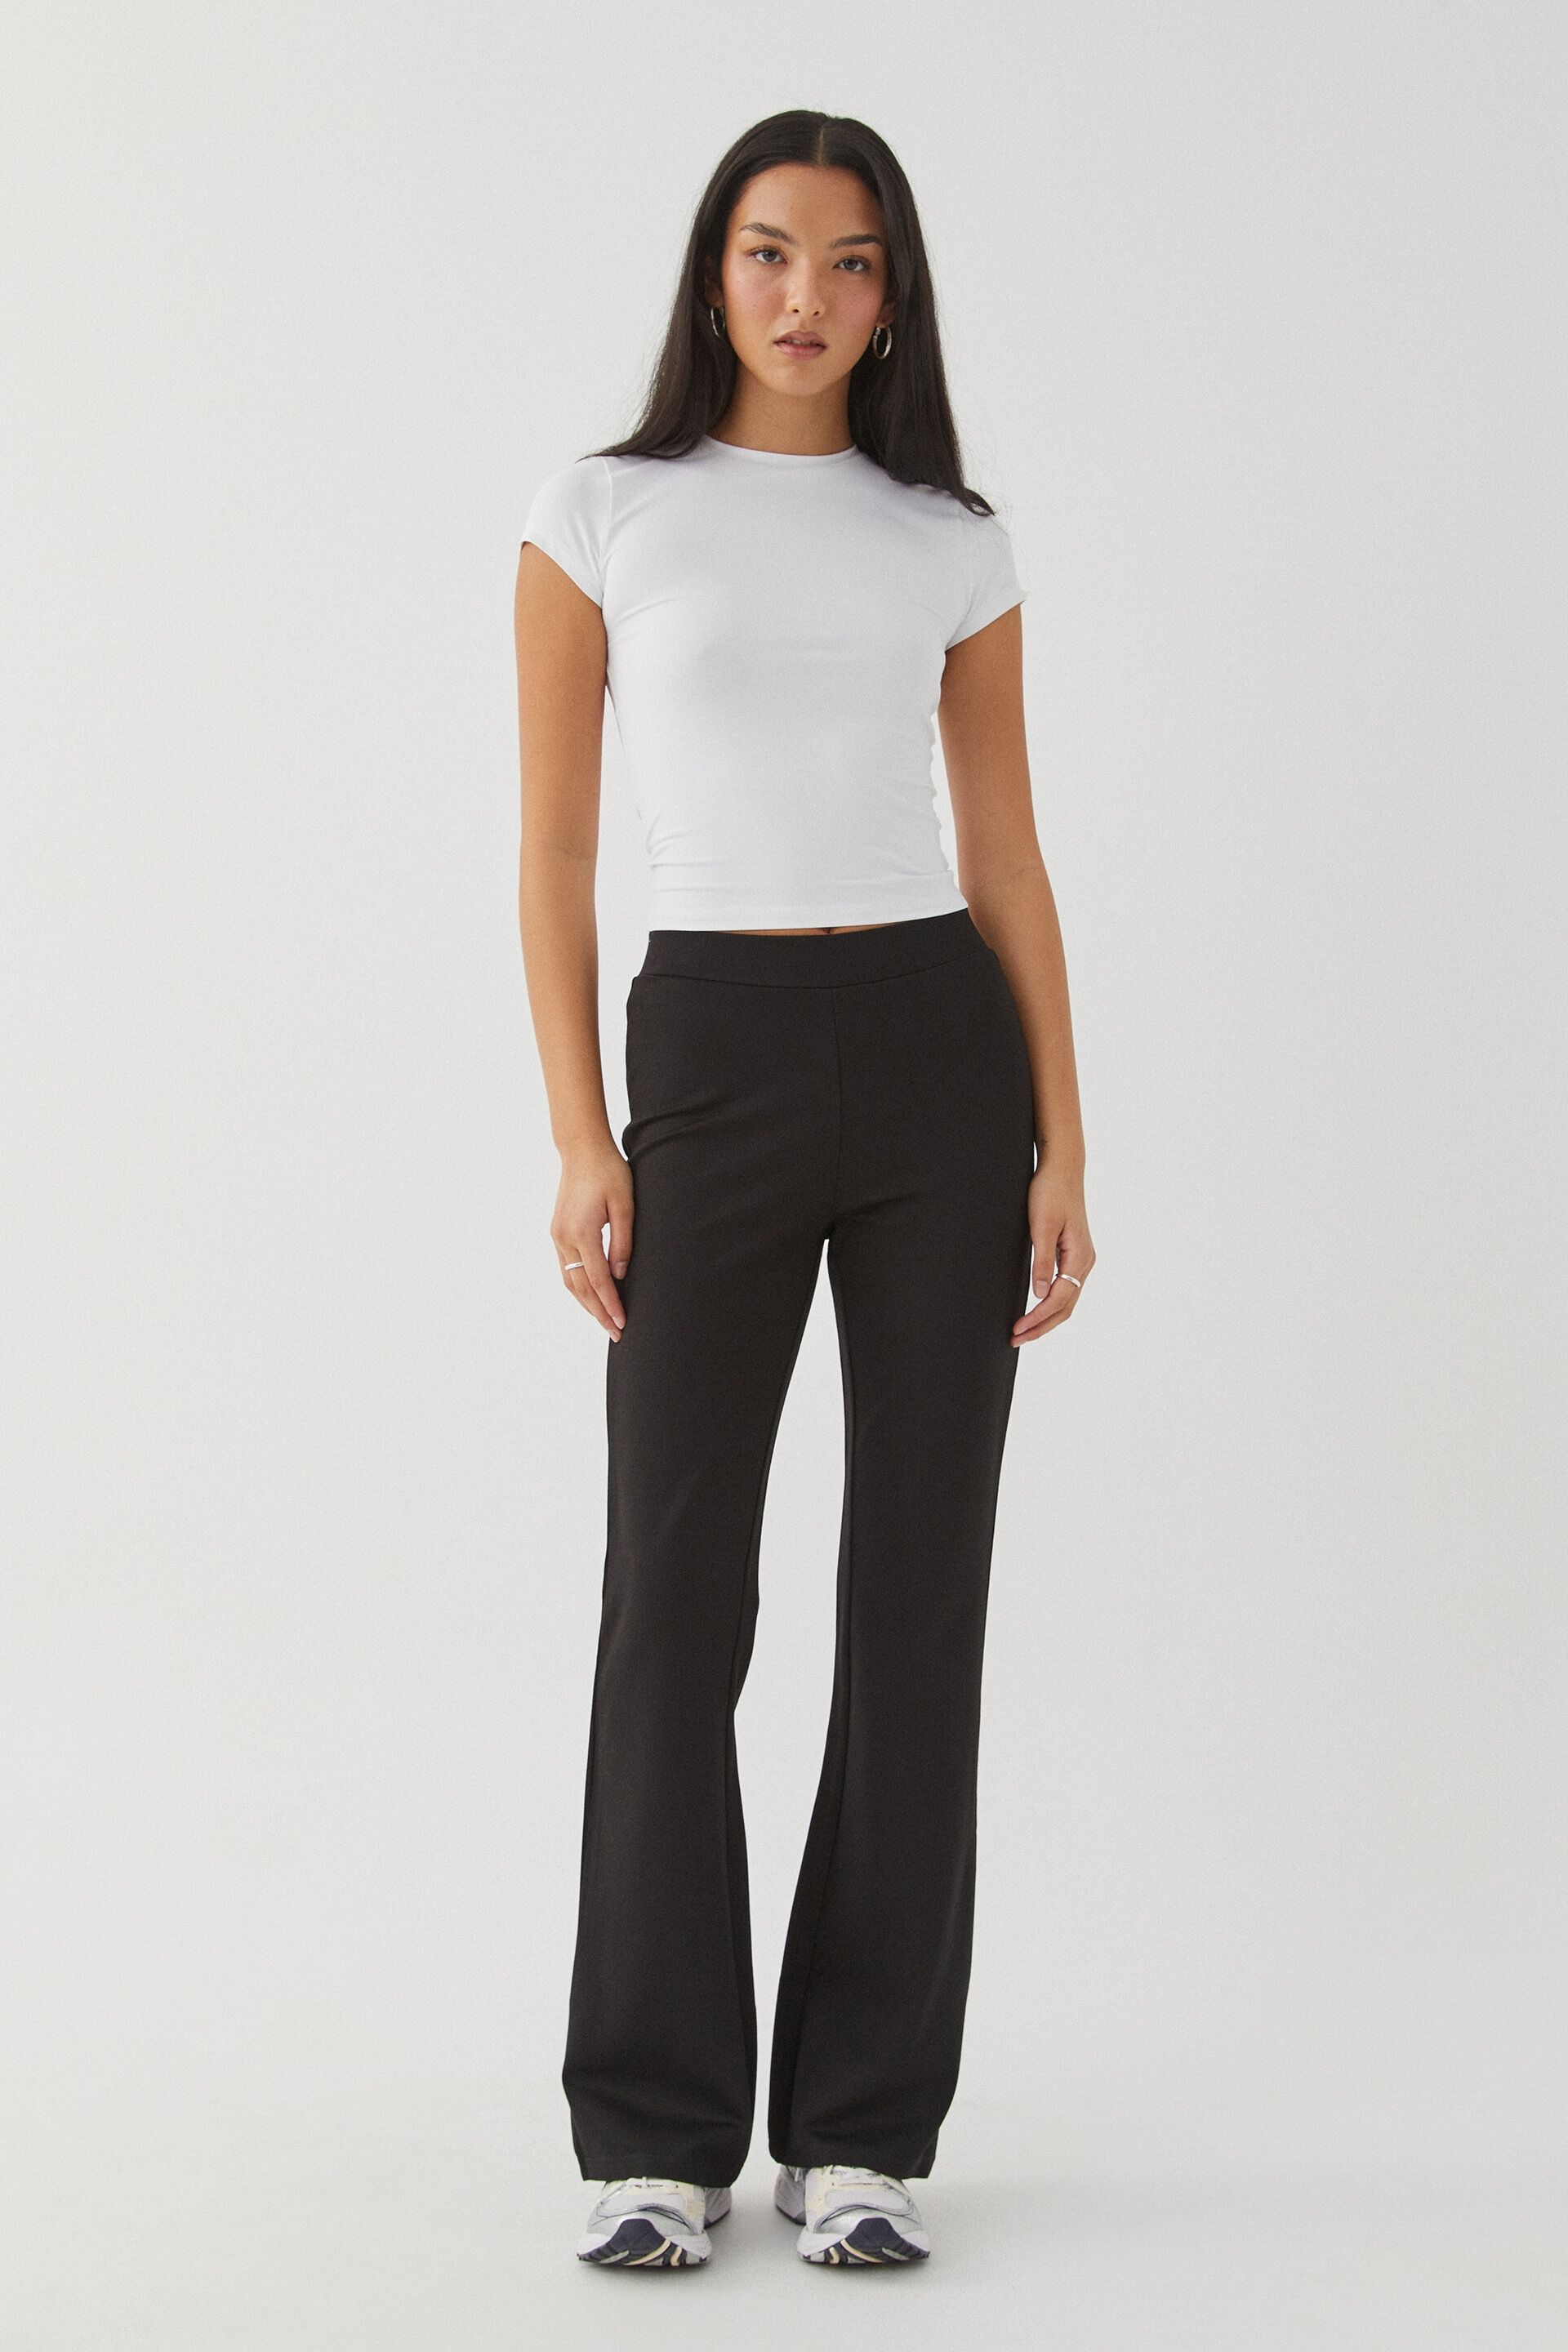 Black Pull On Ponte Flare Pants With Elastic · Filly Flair